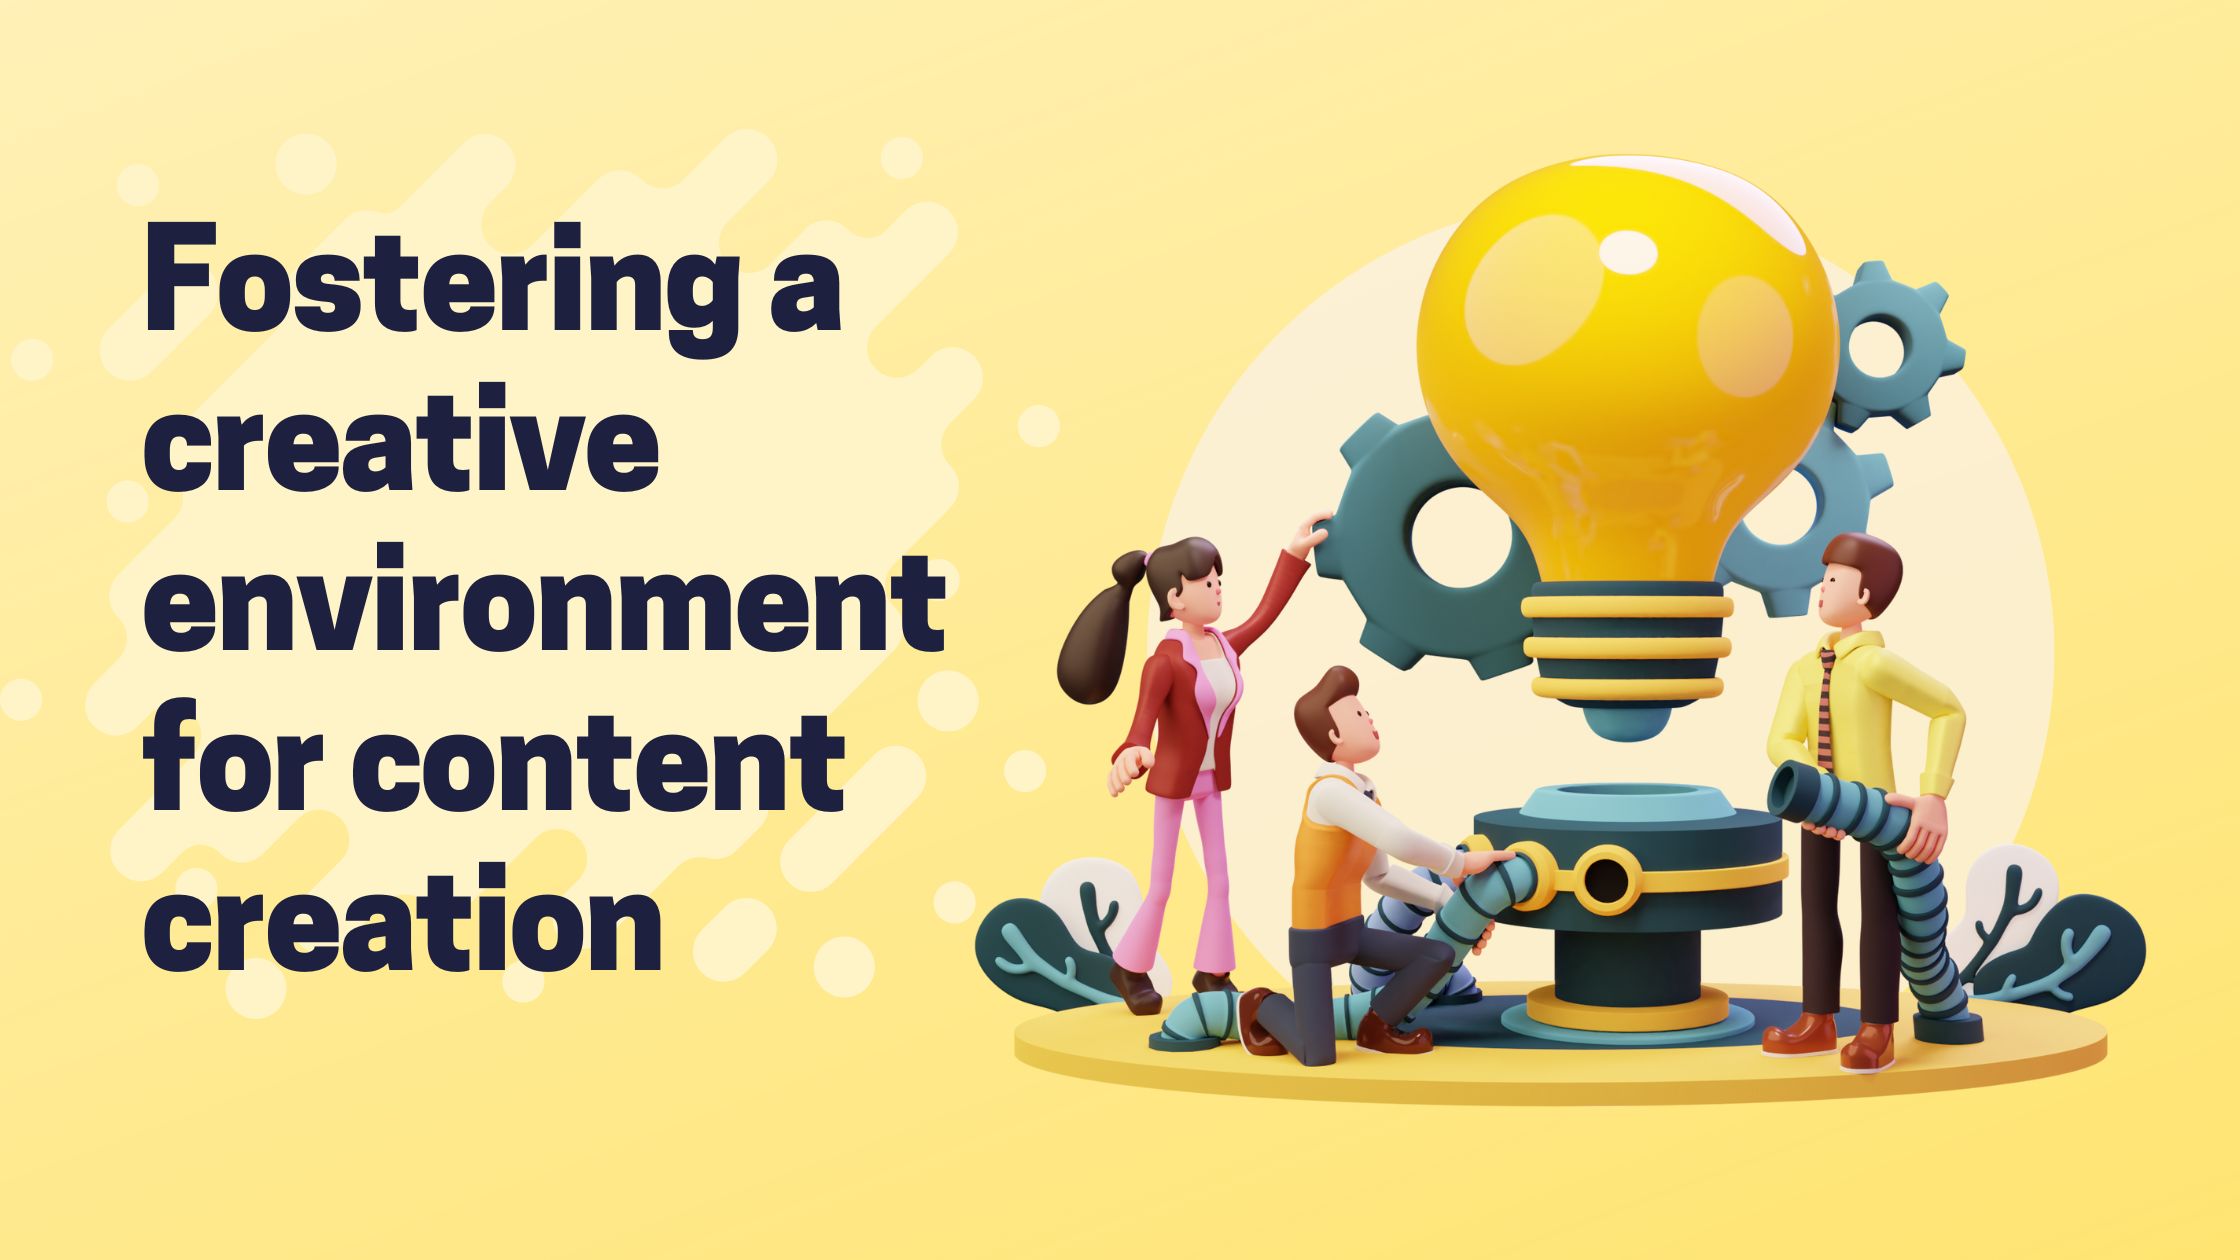 Fostering a creative environment for content creation